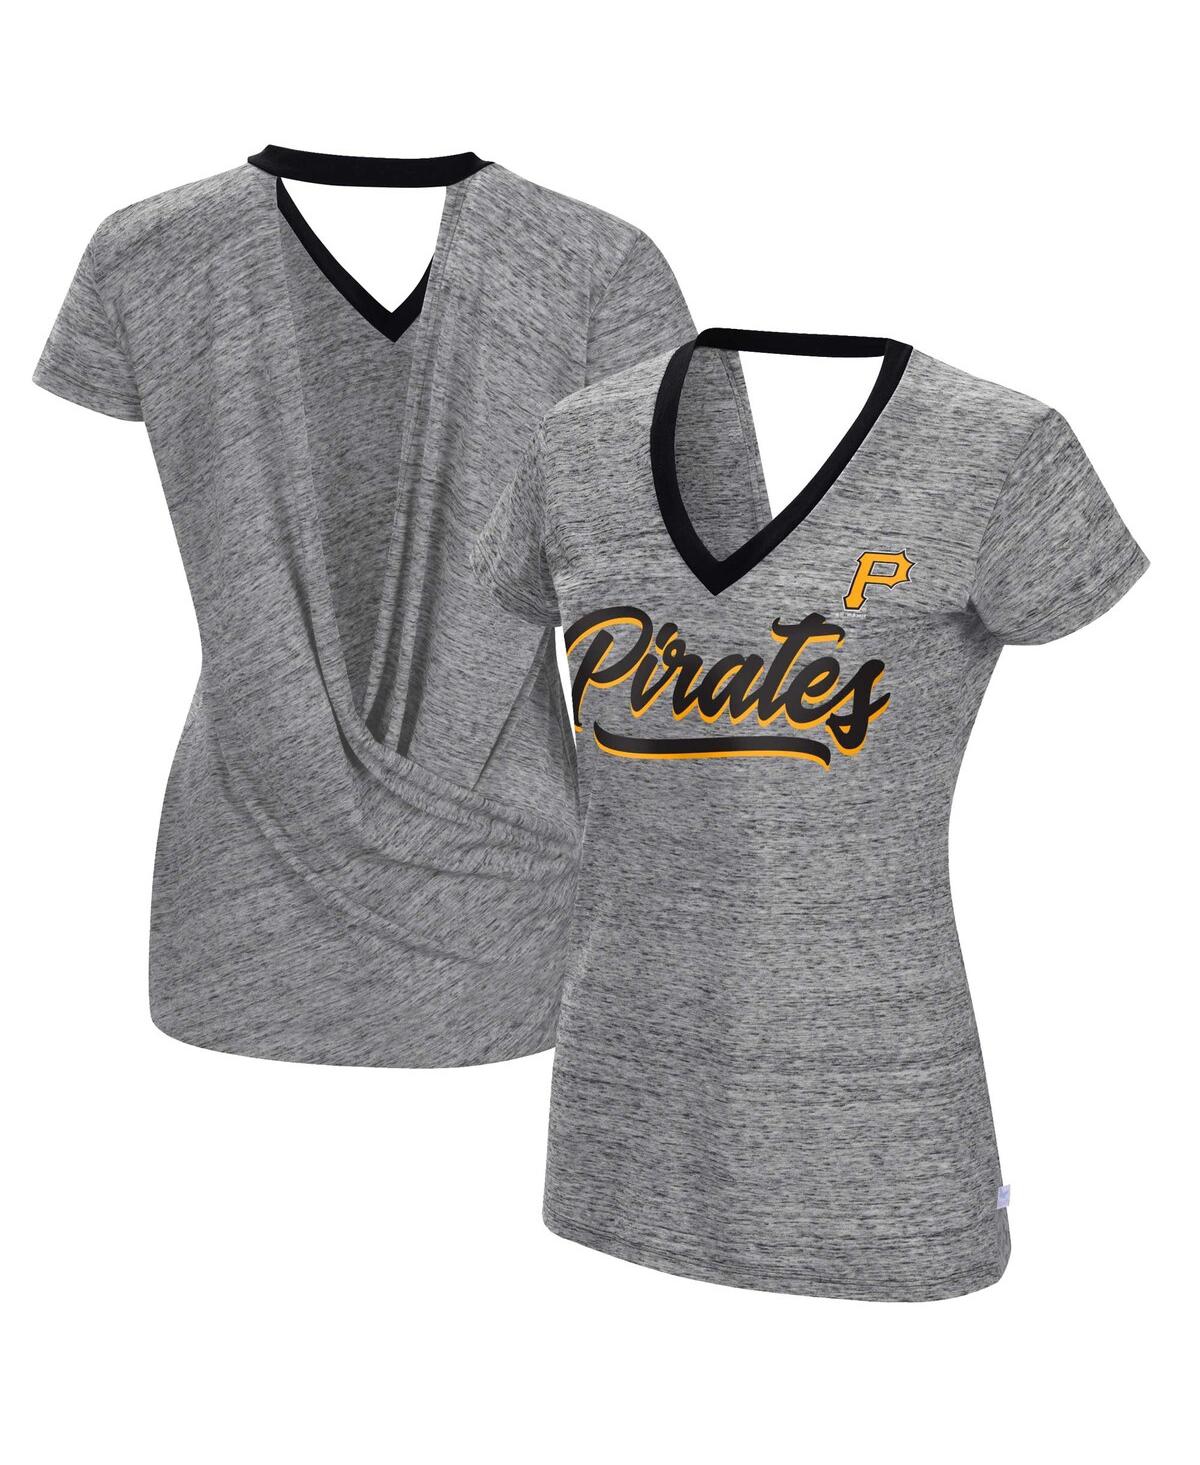 Women's Touch Black Pittsburgh Pirates Halftime Back Wrap Top V-Neck T-shirt - Black